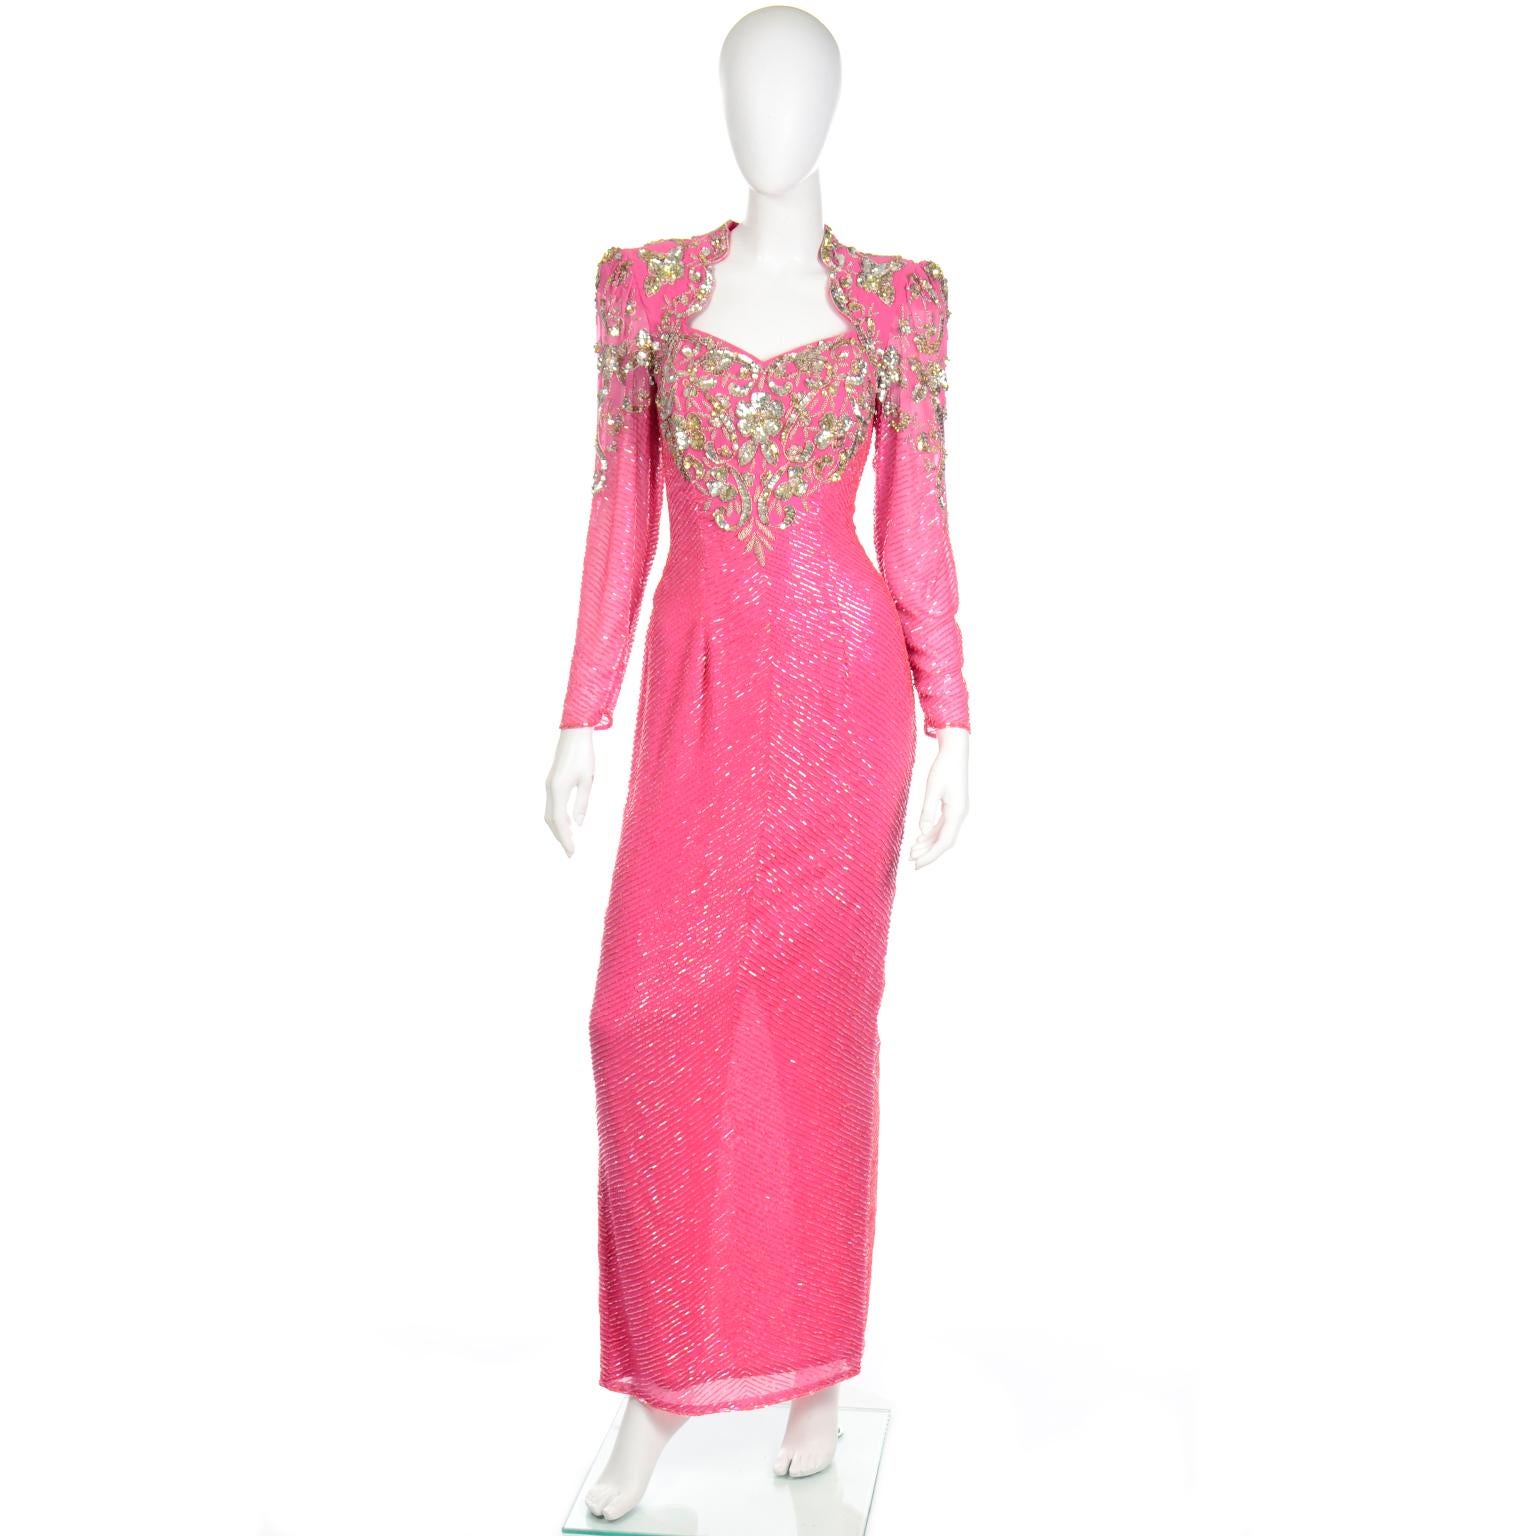 This dramatic vintage beaded pink evening gown was designed by Diane Freis in the 1980's.This dress is truly stunning in person and shimmers in the light when it moves. The dress is covered with rows of bugle beads and the bodice and shoulders are